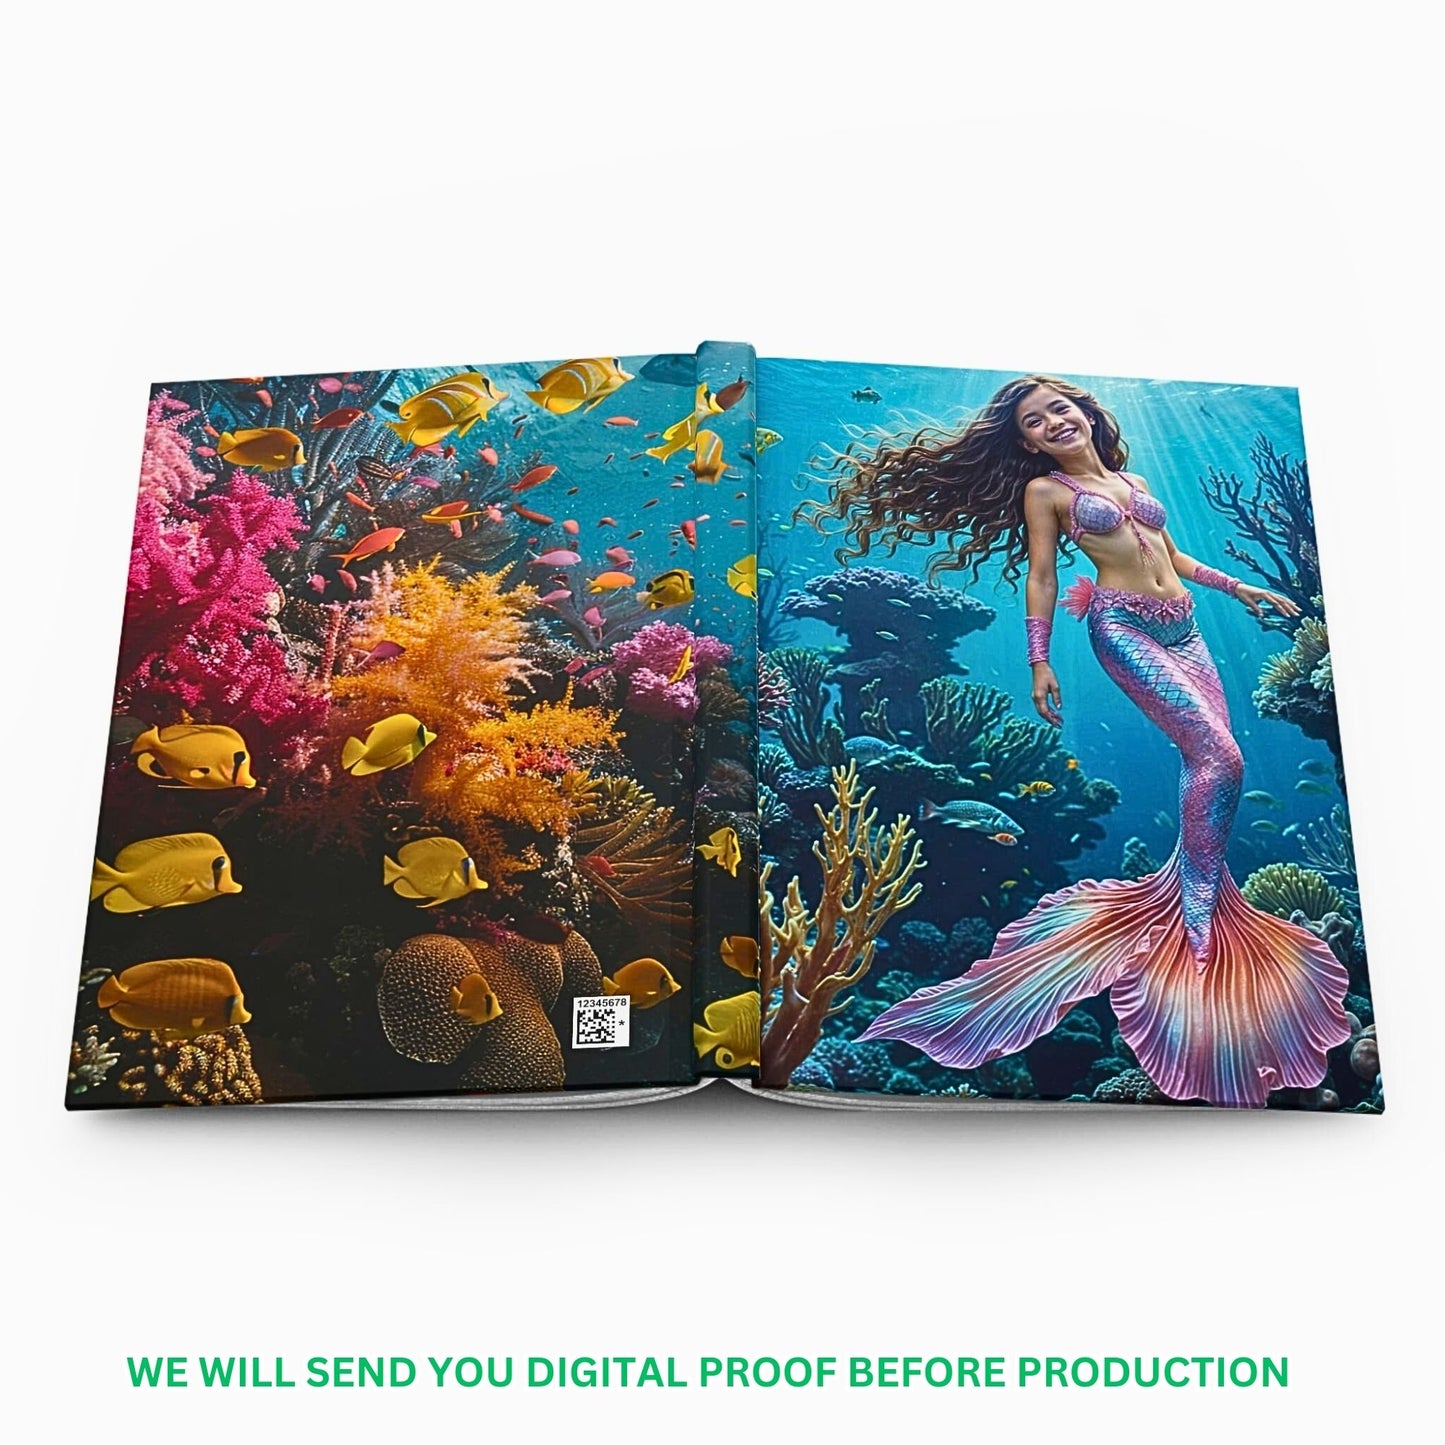 Discover our Custom Mermaid Journal From Photo, ideal for a unique gift. Personalized with a cute little mermaid theme, perfect for birthdays and more!